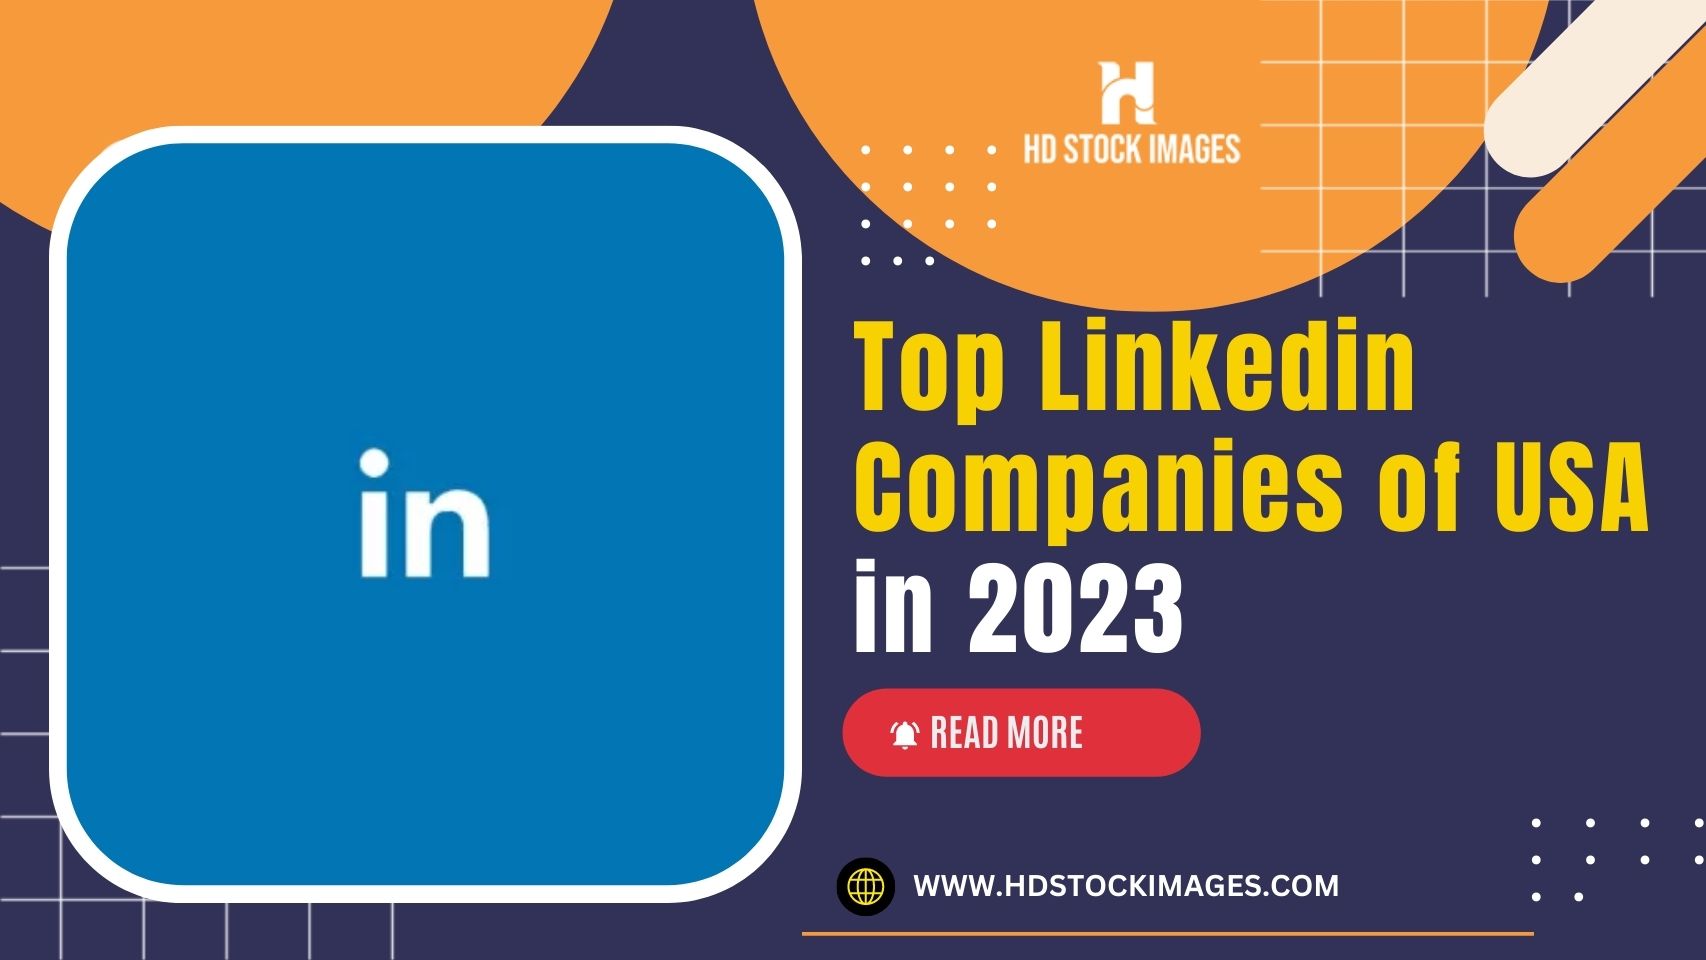 List of Top Linkedin Companies of USA in 2023 HD Stock Images